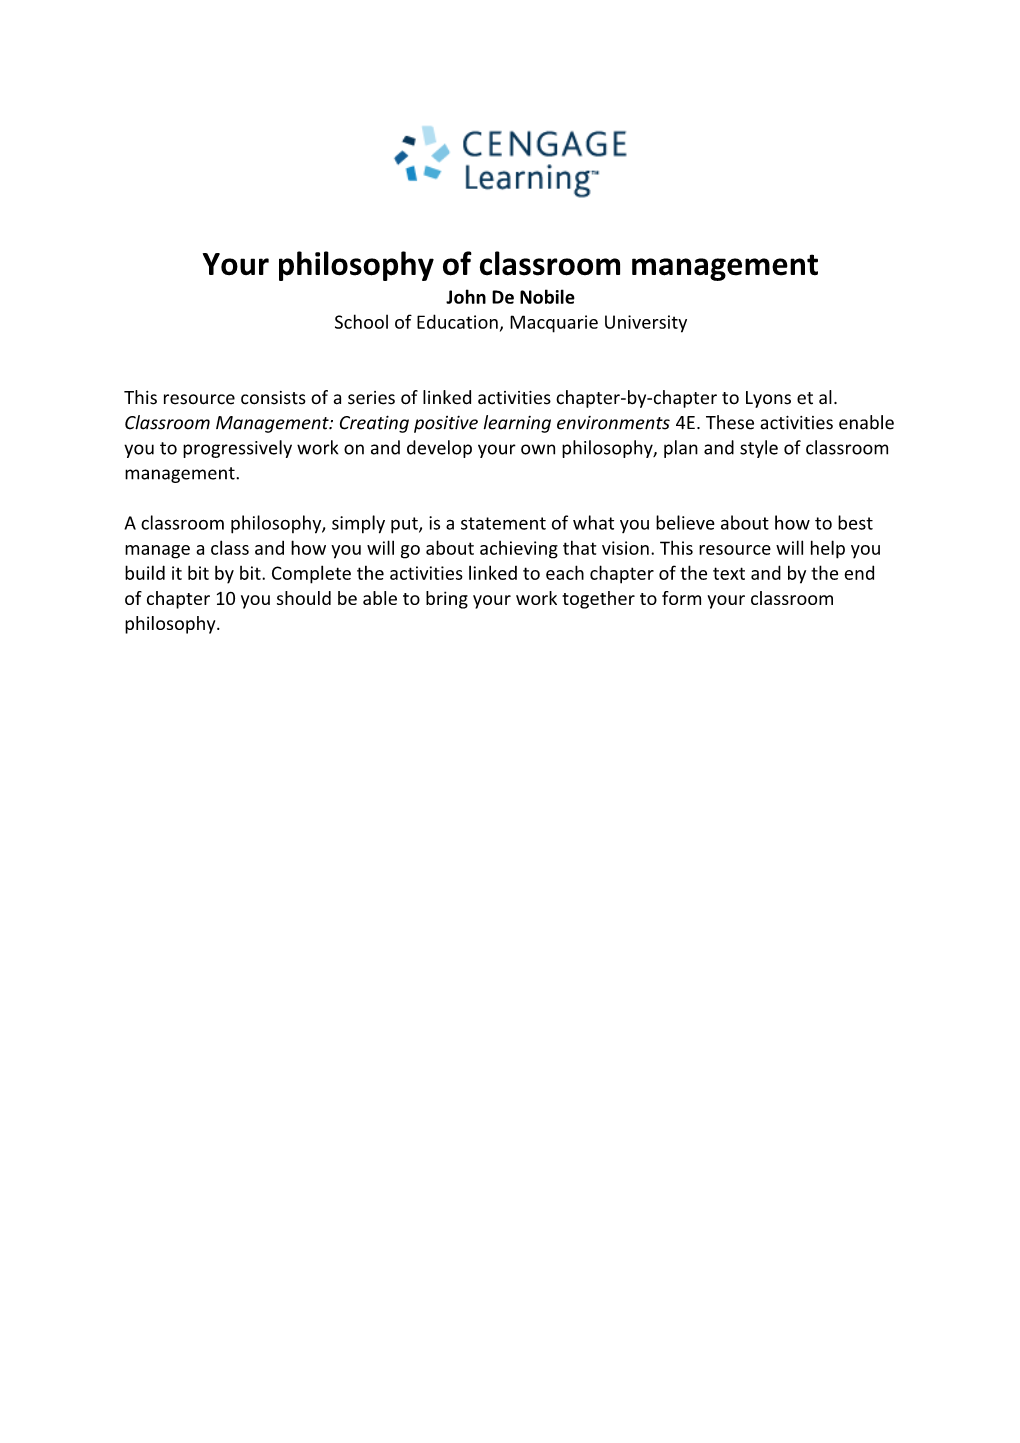 Your Philosophy of Classroom Management